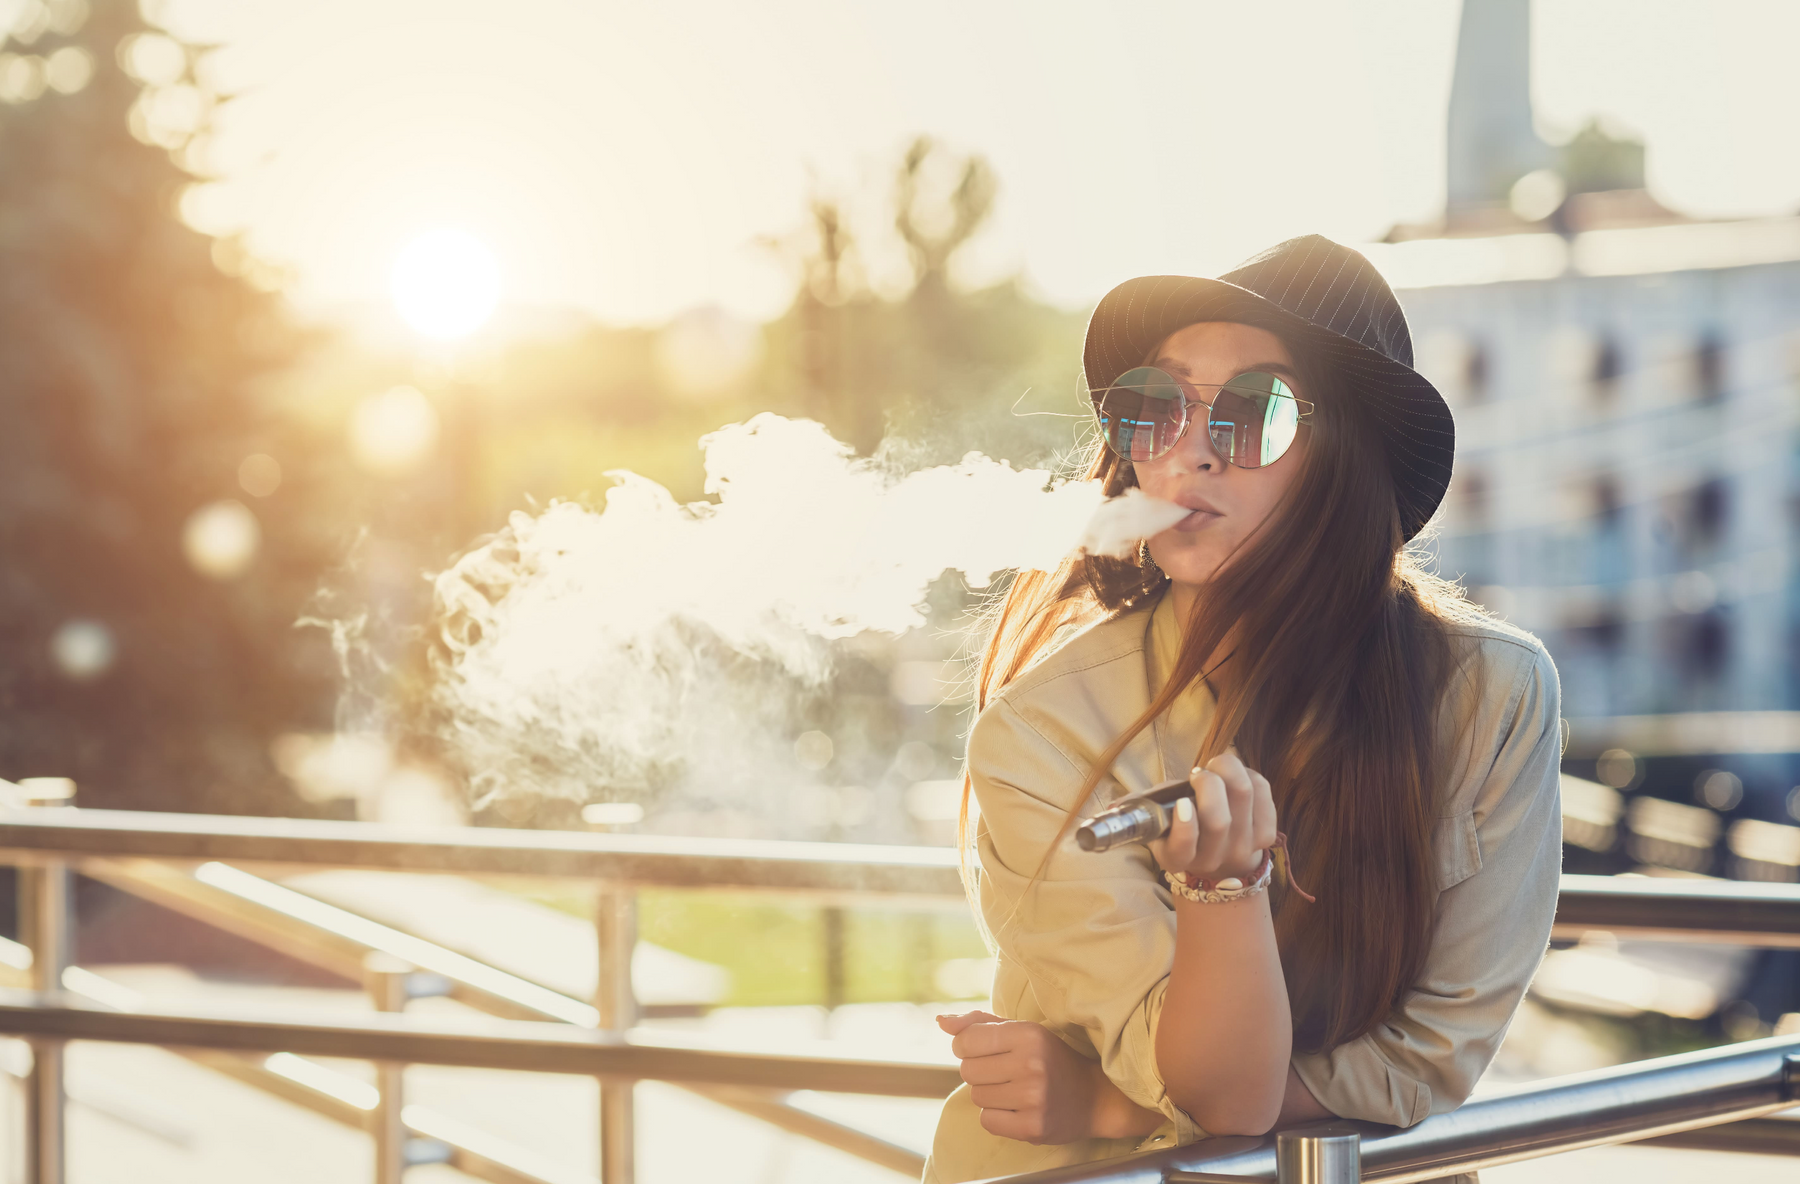 How to Buy a Vape: Online vs the In-Store Experience